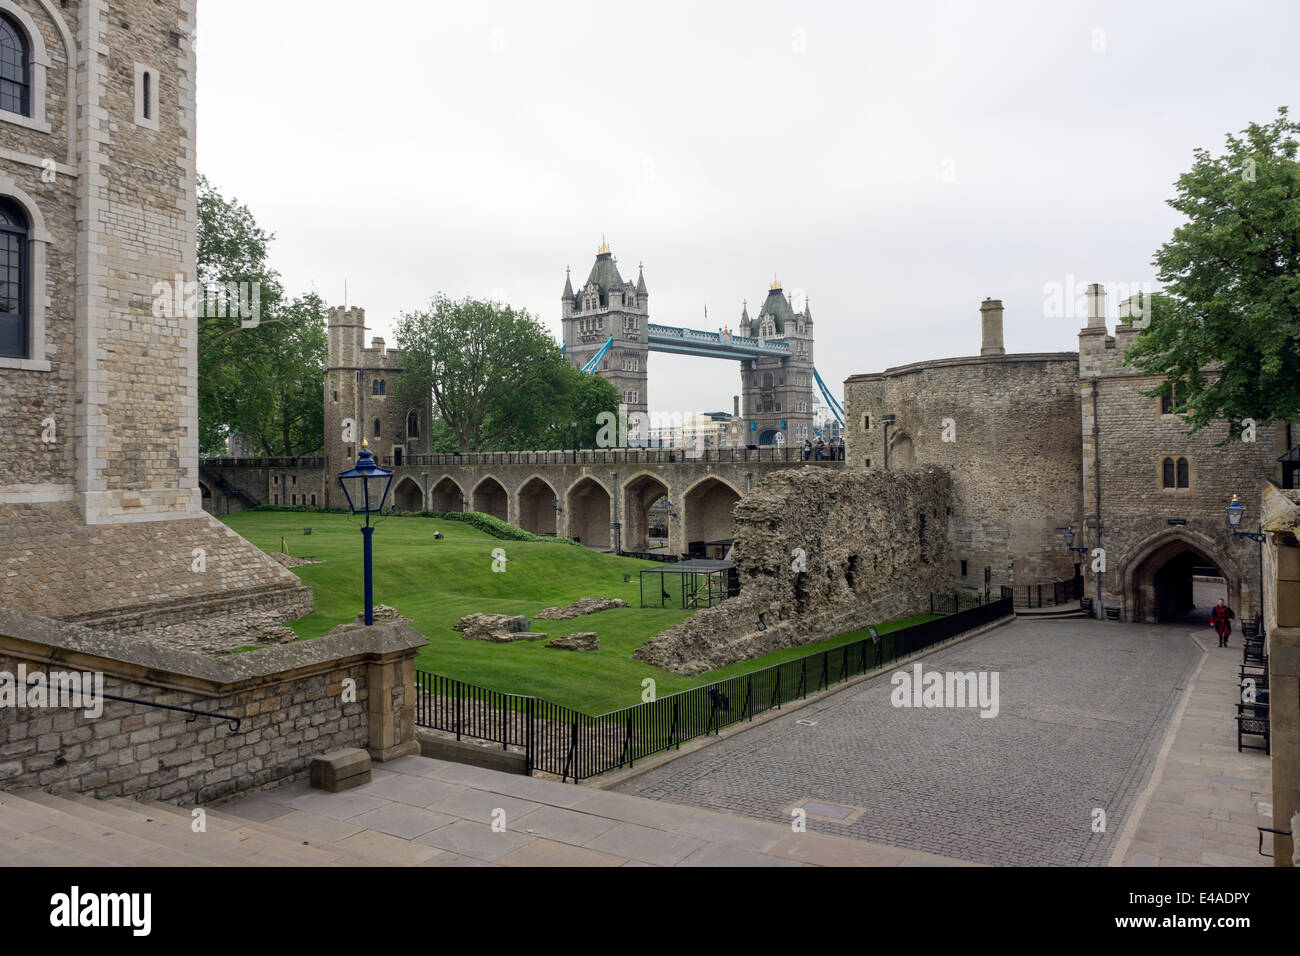 Great Britain, England, London, Tower of London, White Tower, Lanthorn Tower, Wakefield Tower and Bloody Tower, in the background Tower Bridge Stock Photo